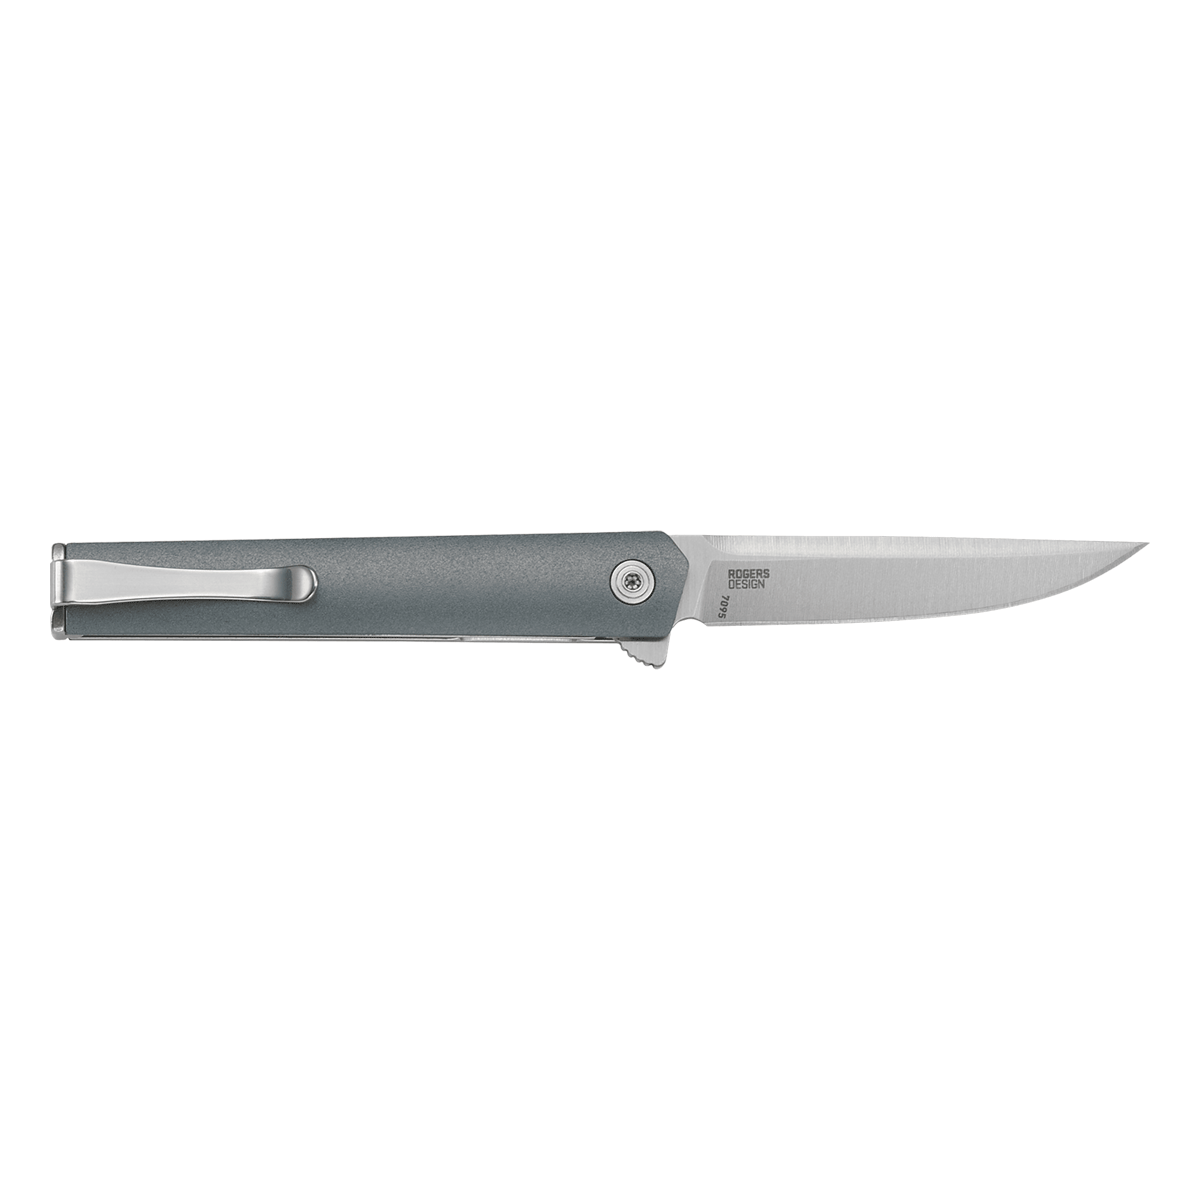 CRKT CEO COMPACT